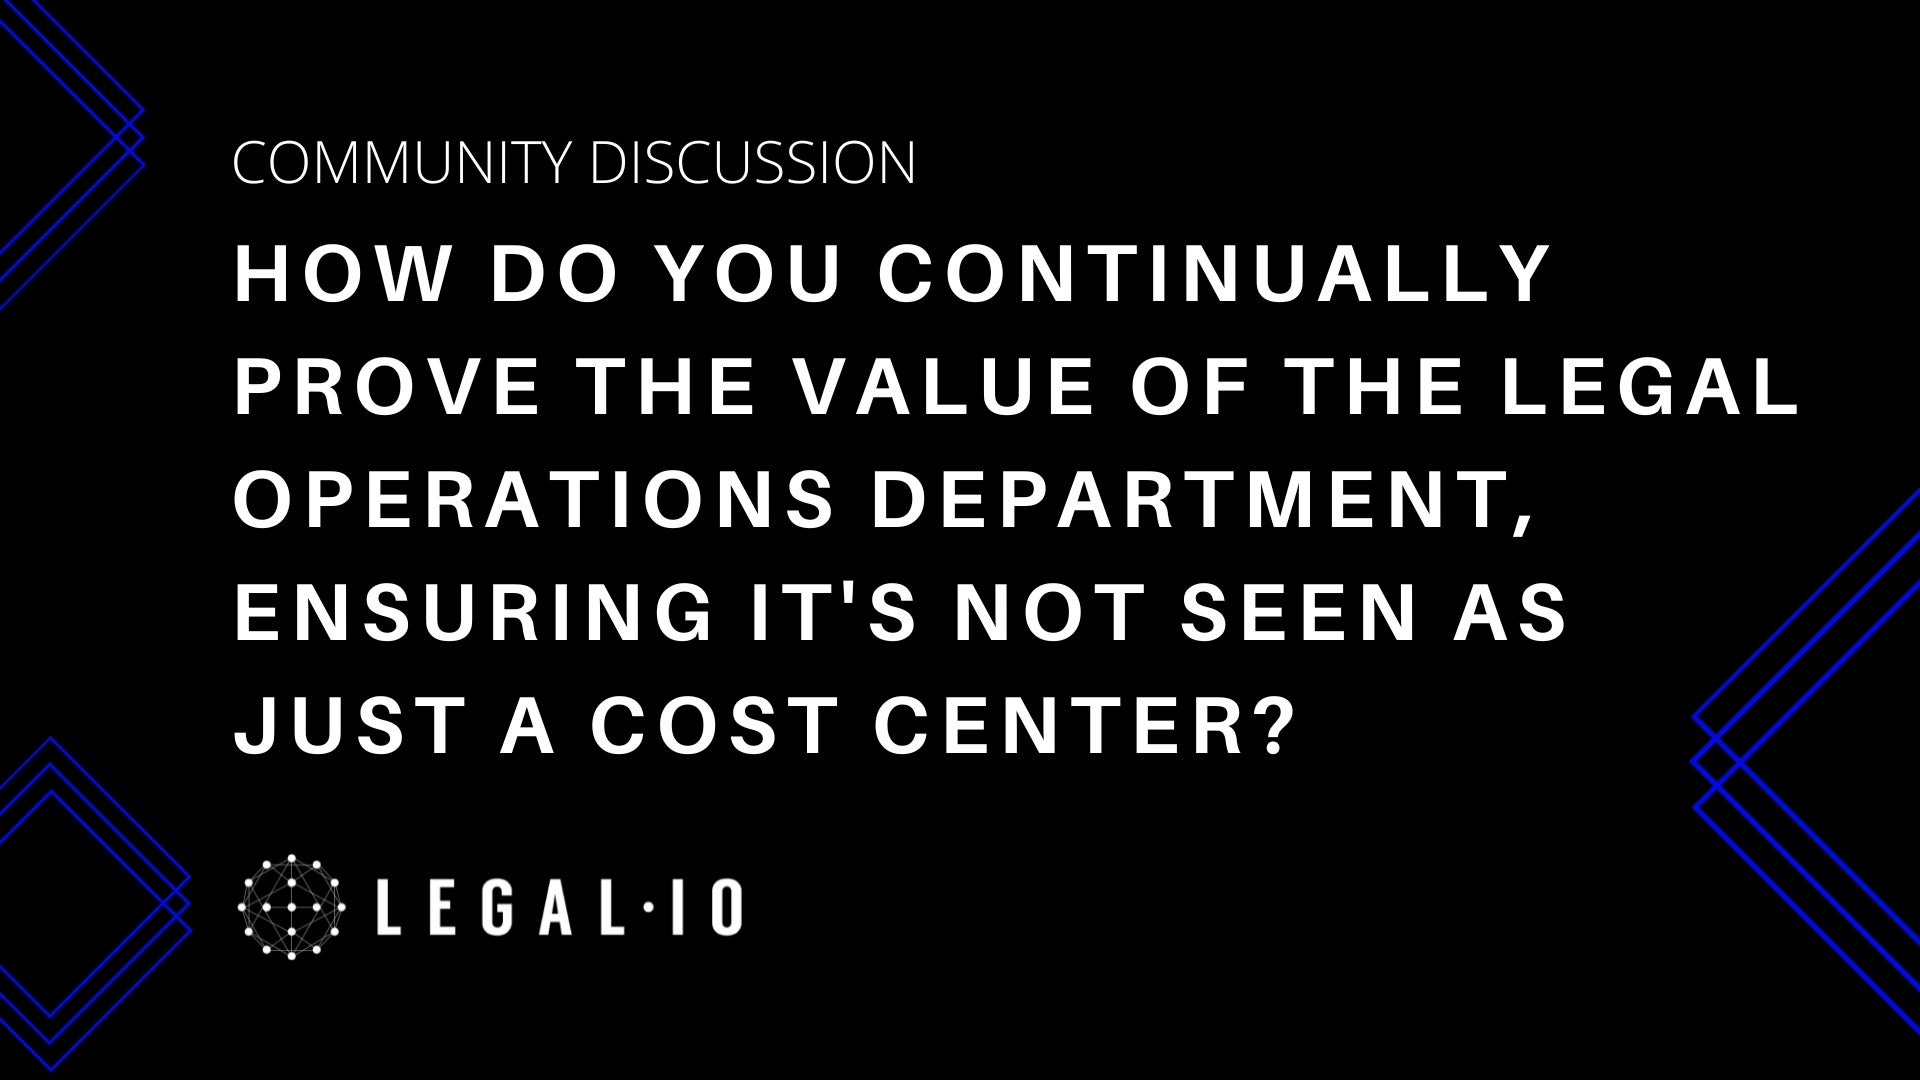 Community Discussion: How do you continually prove the value of the legal operations department, ensuring it's not seen as just a cost center?